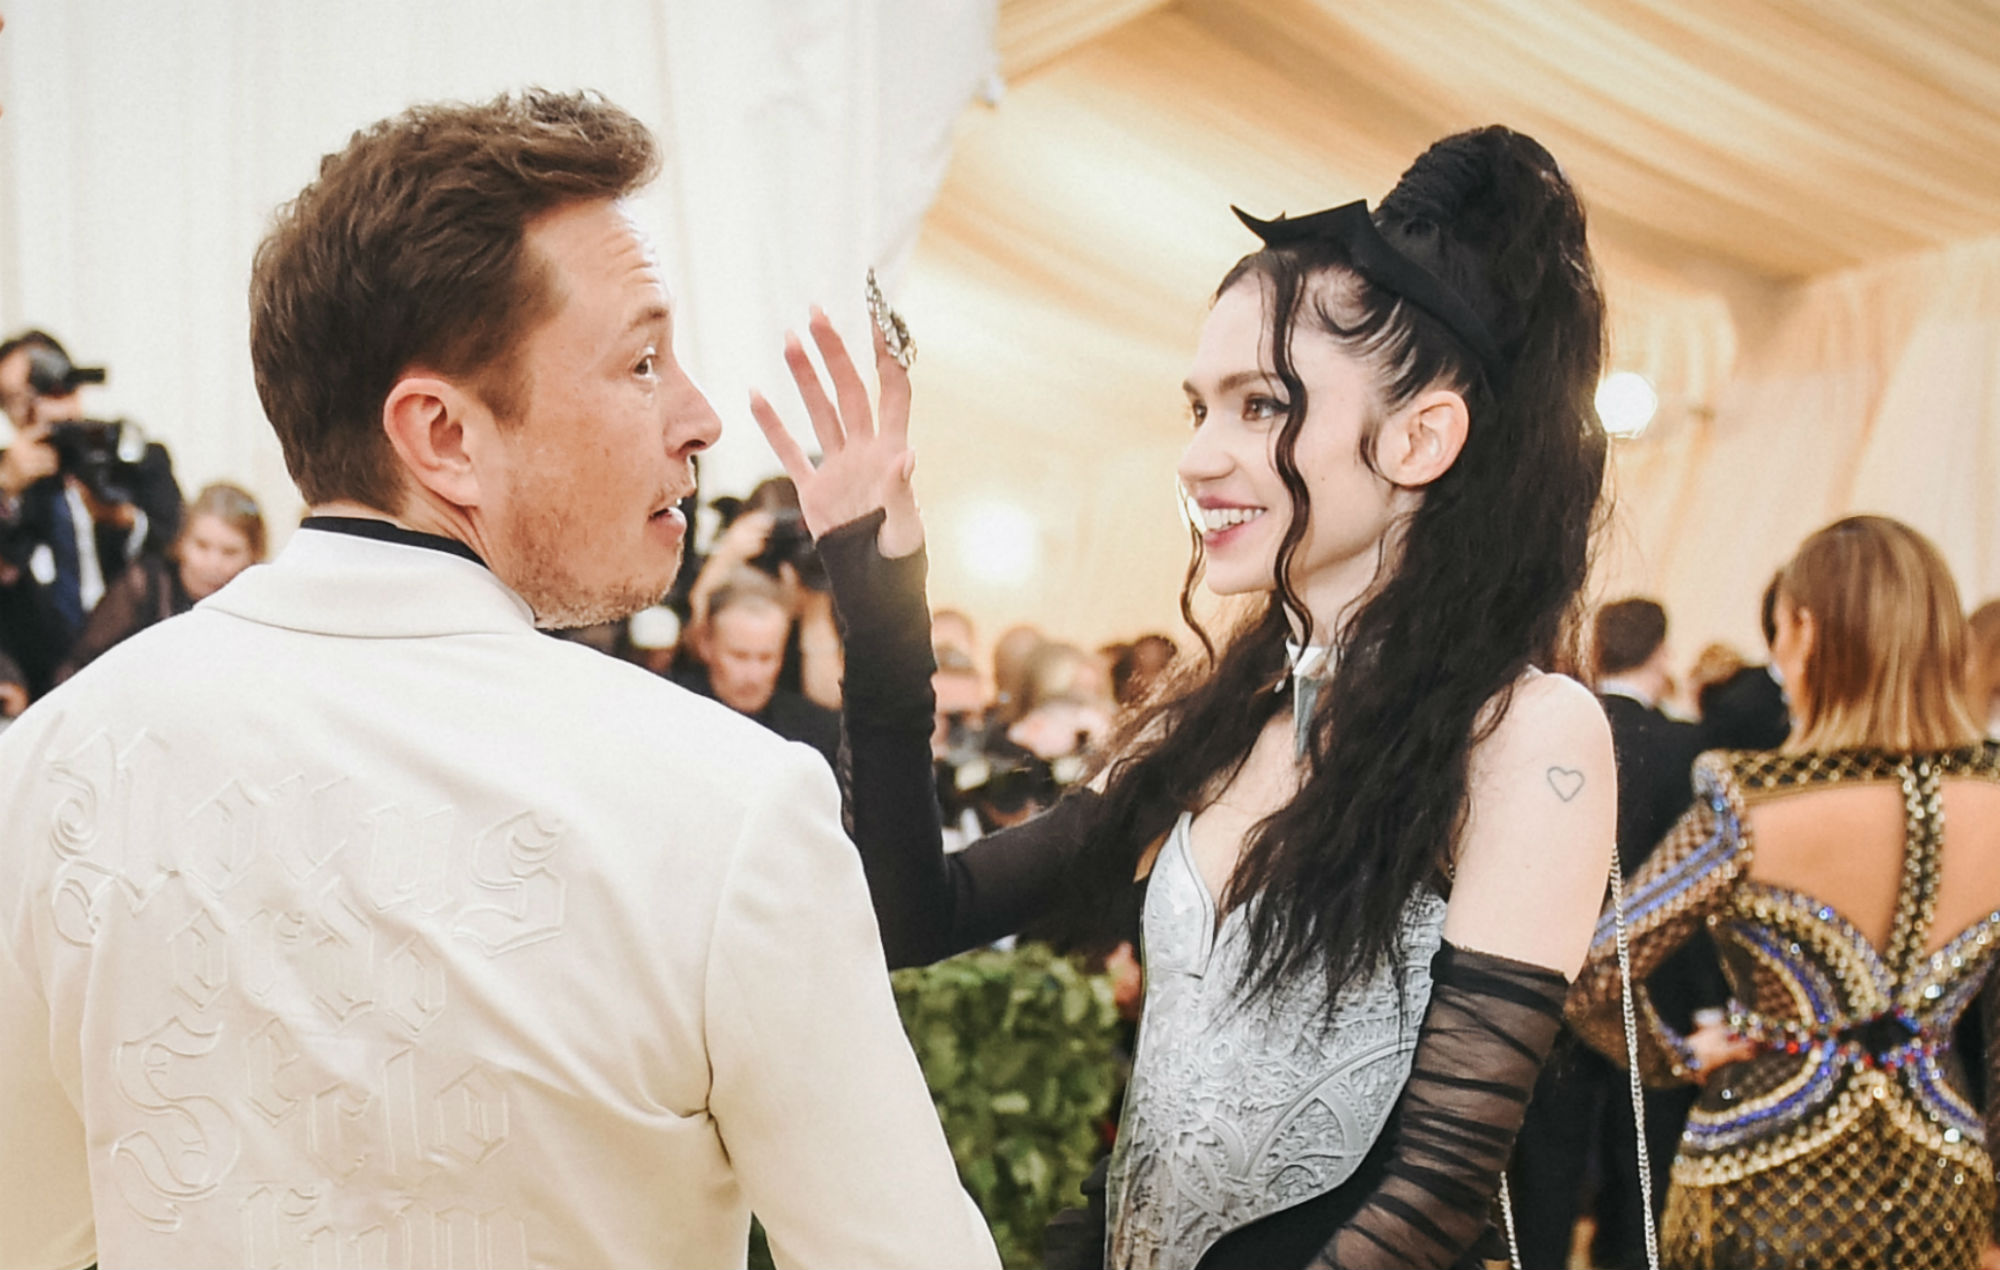 Grimes says Elon Musk “killed it” on ‘SNL’, which she “knows will upset the Grimes fans”